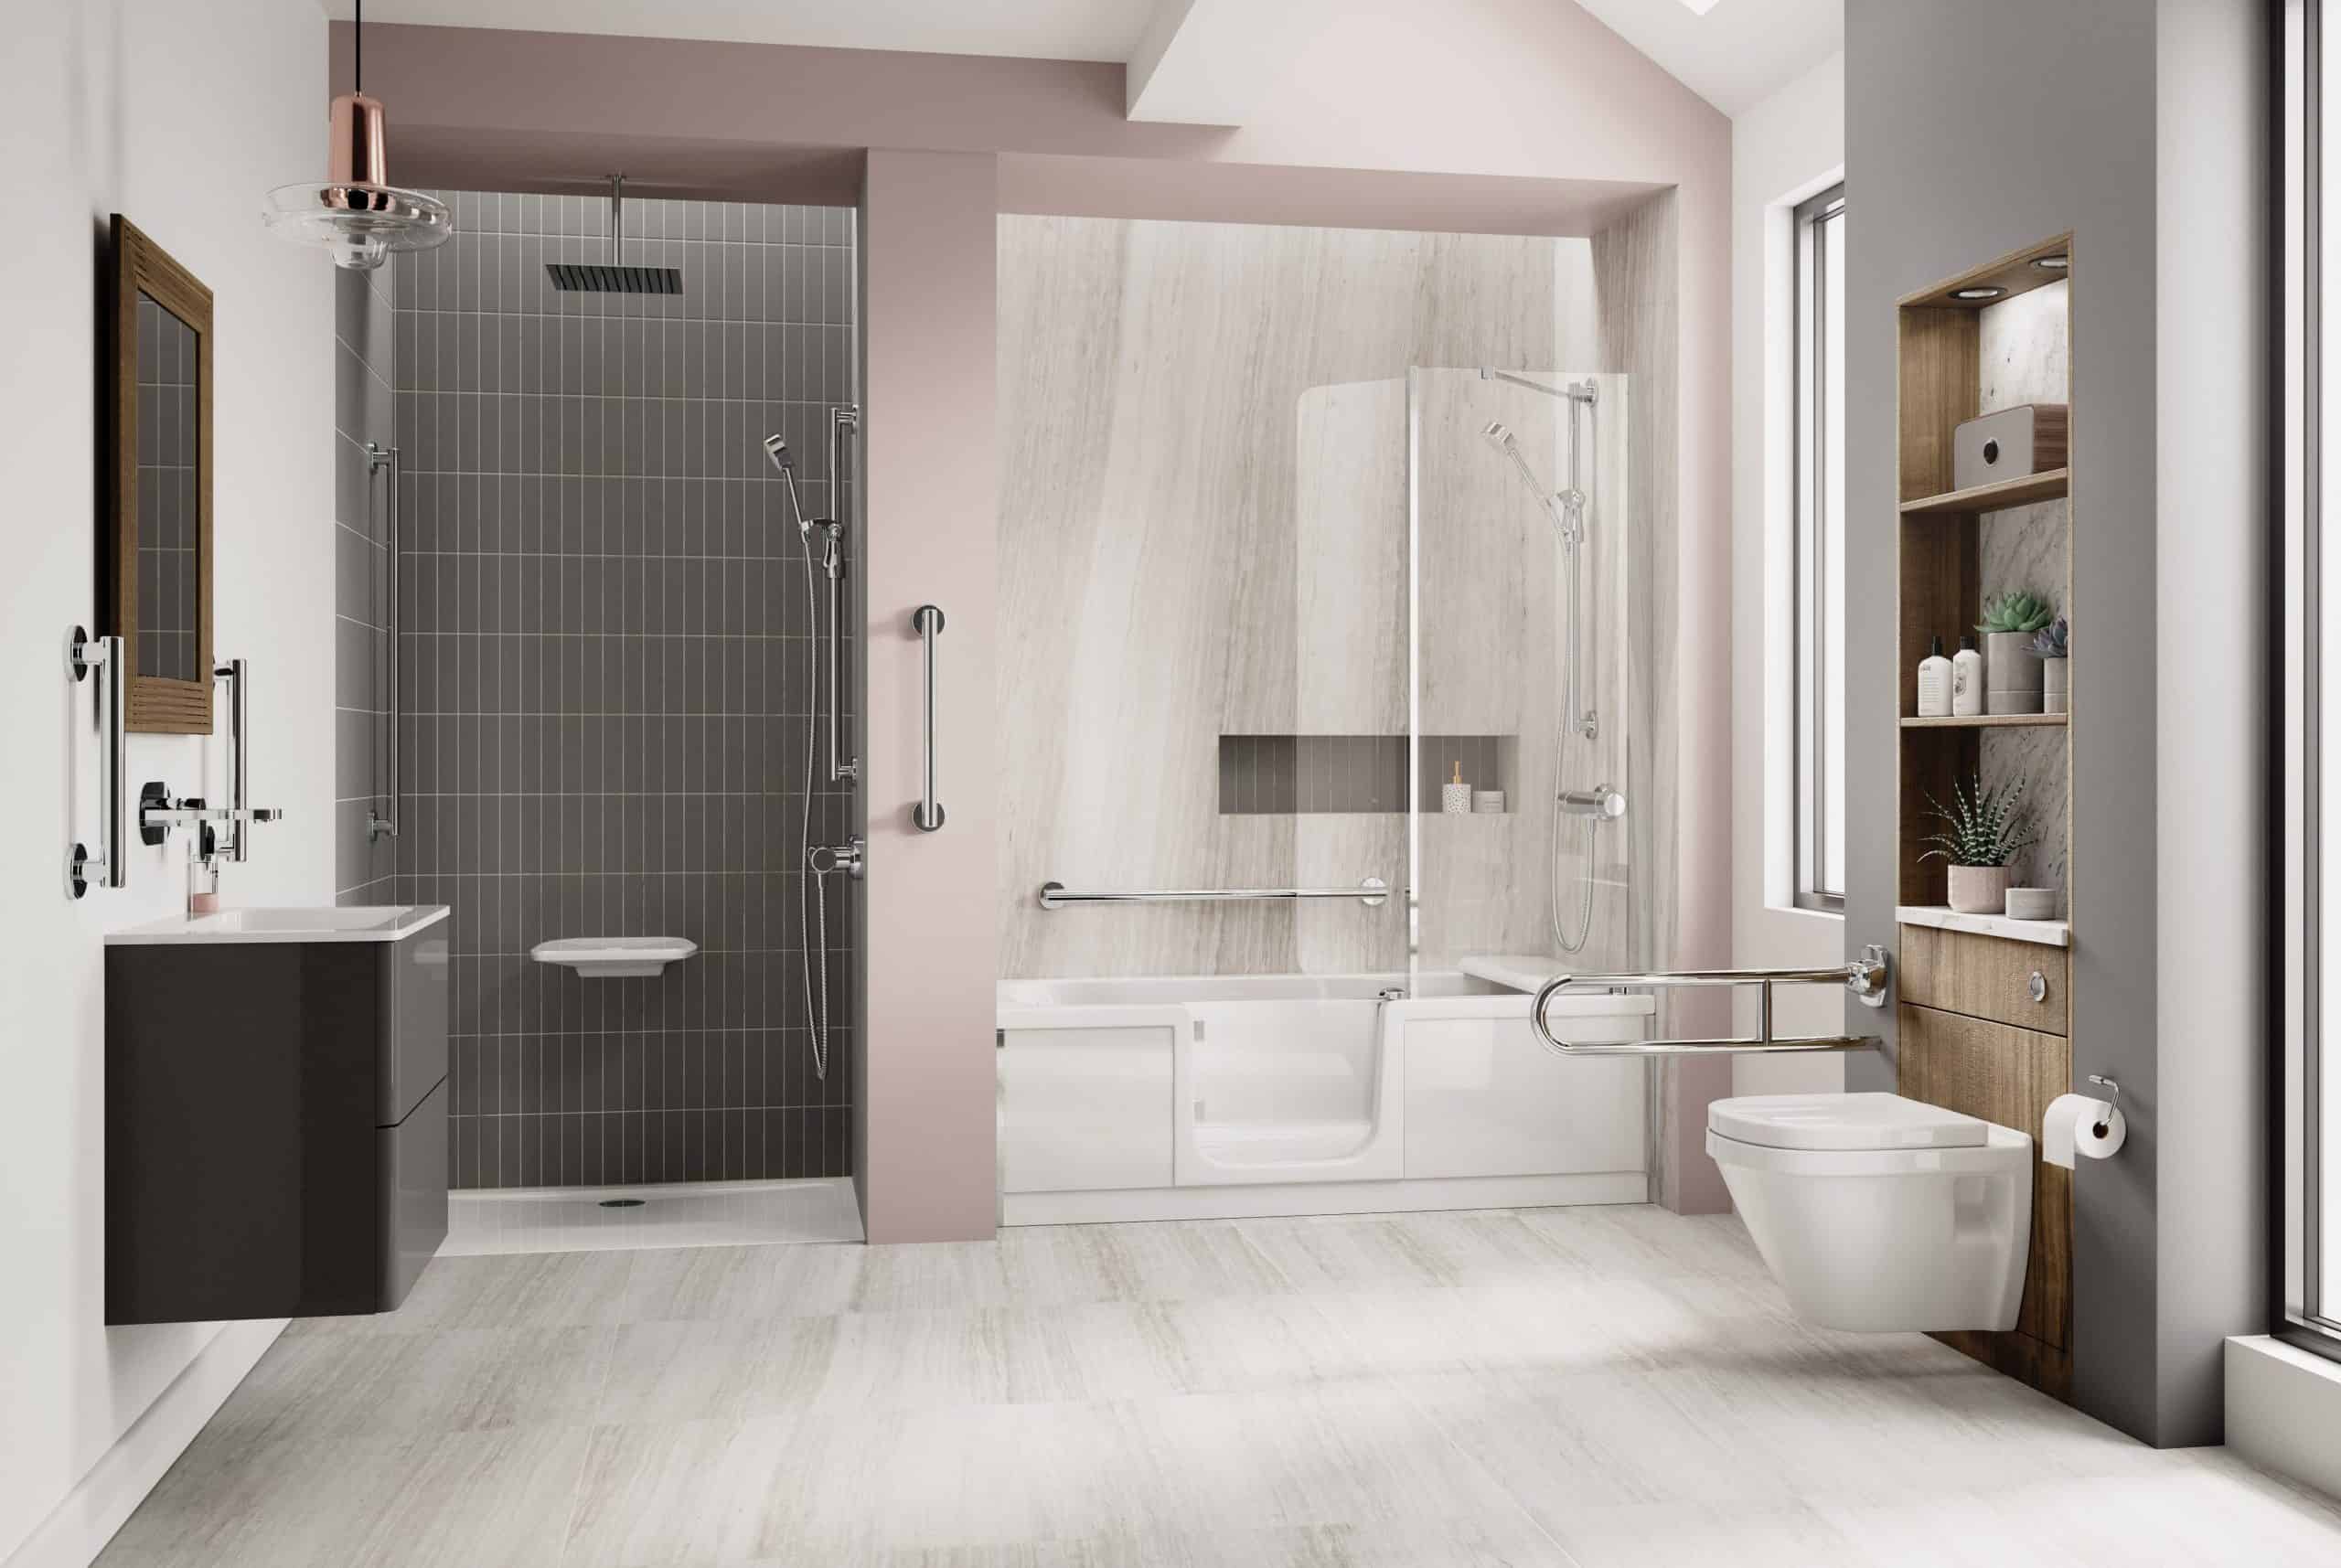 A future proofed bathroom space example with grab rails, easy access baths and a shower seat